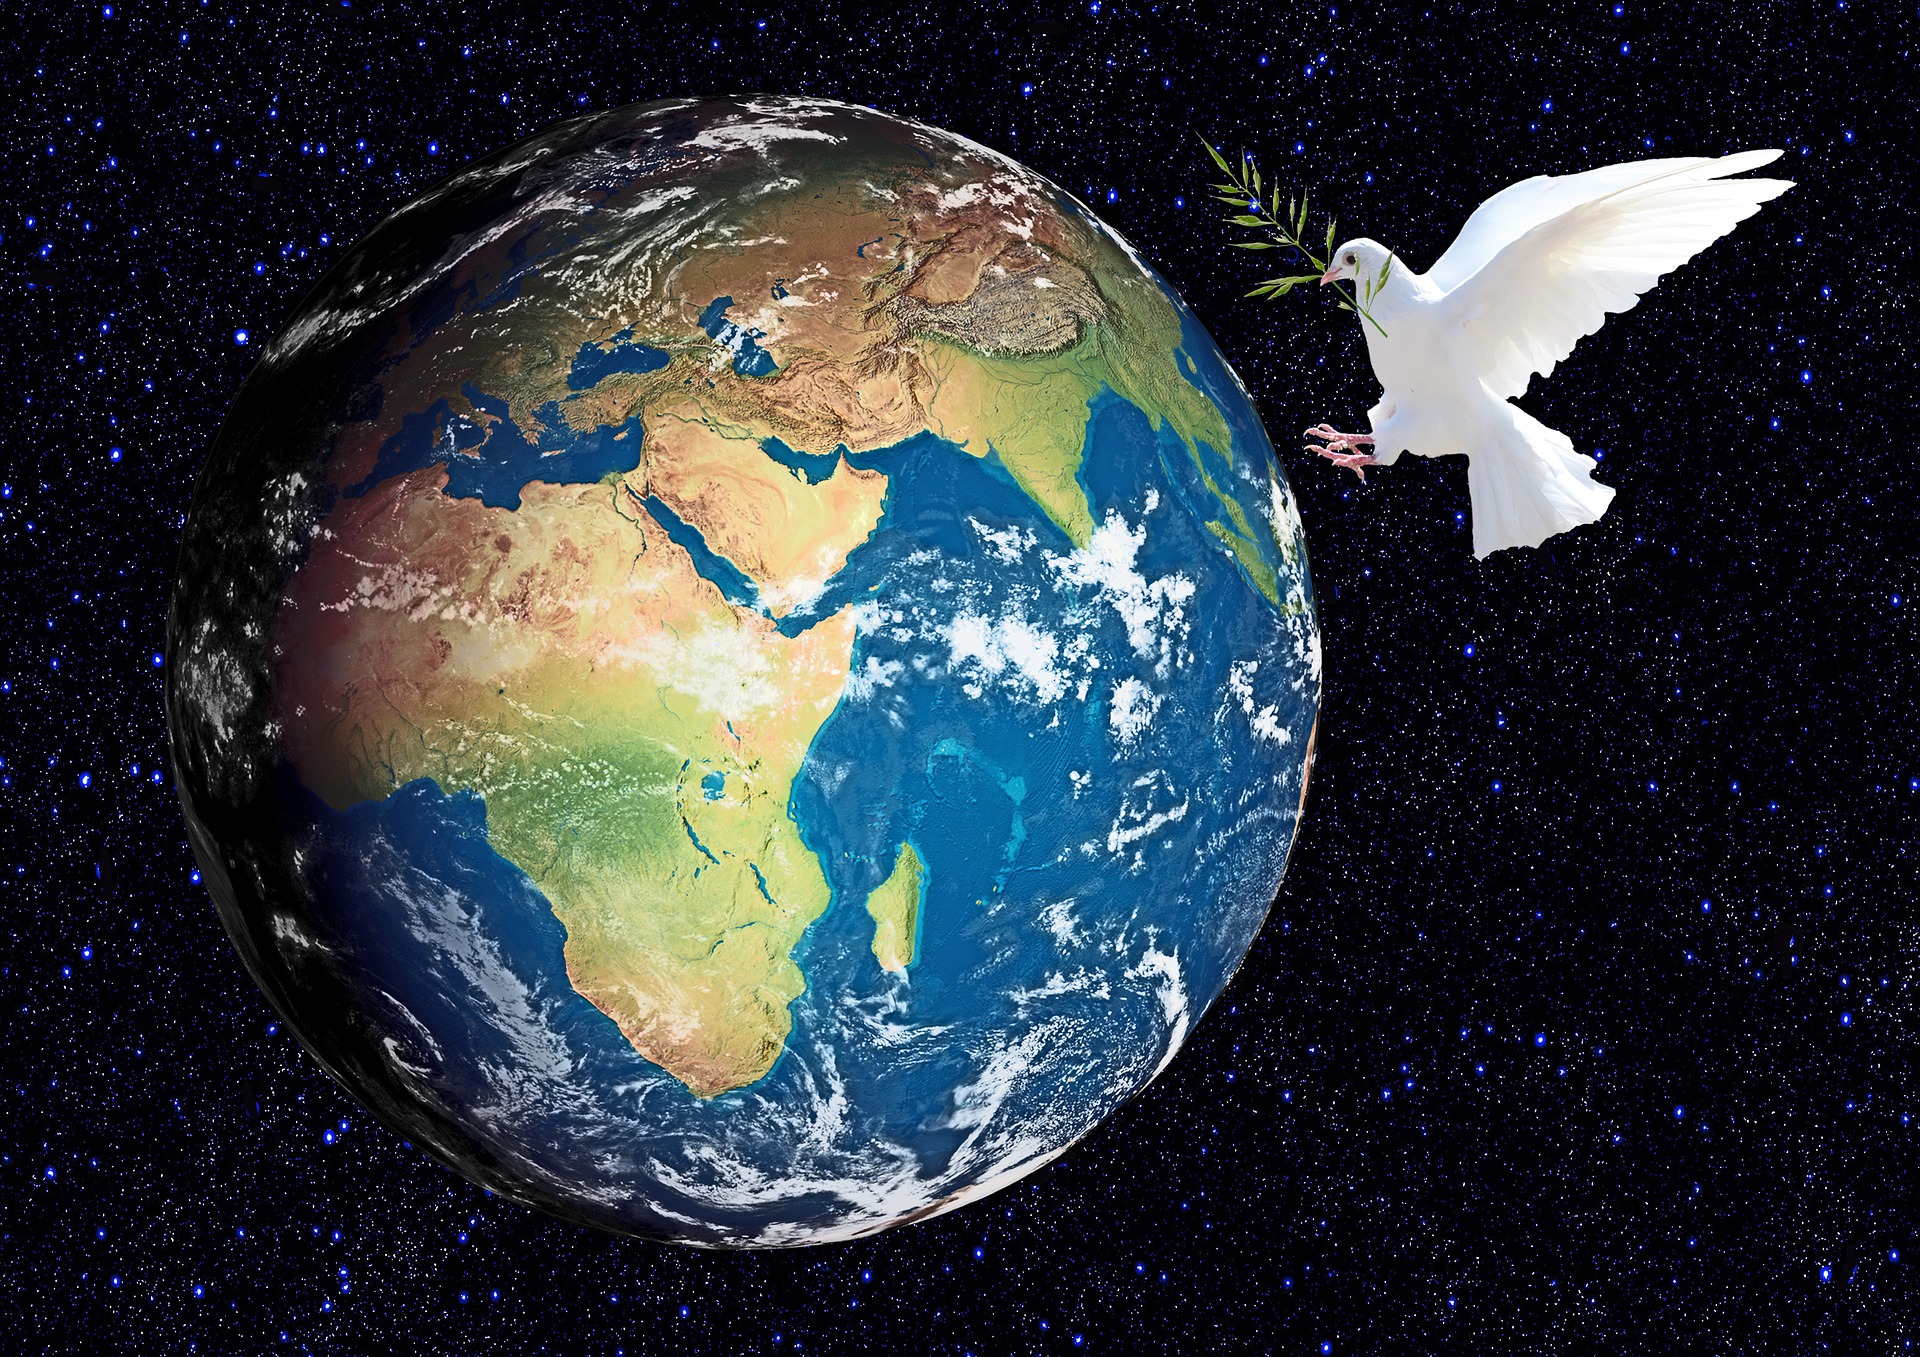 The dove is the international symbol of peace, as seen here flying above the earth with an olive branch in its beak.